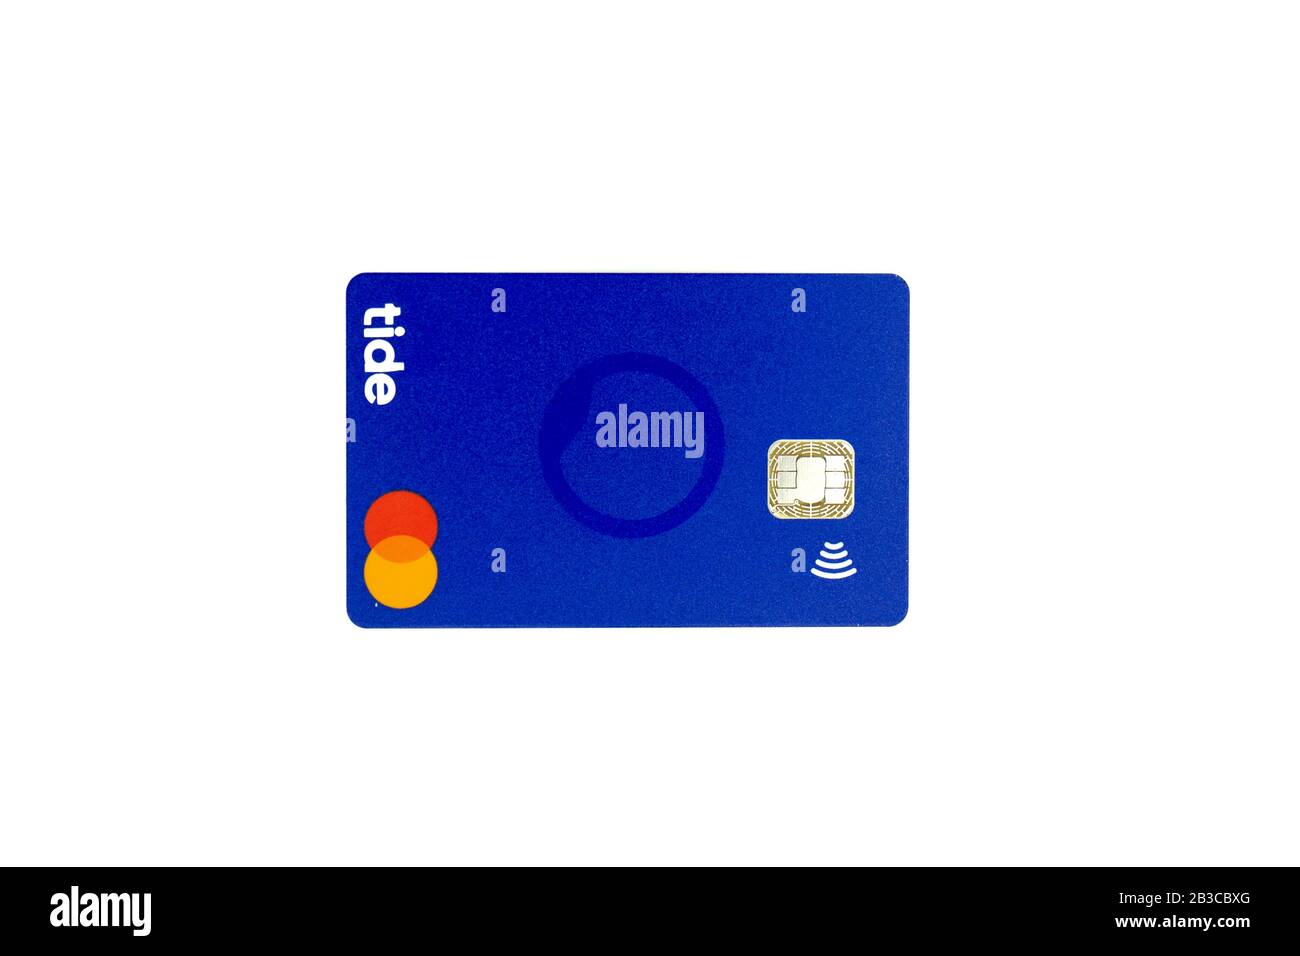 A Tide bank Debit card Mastercard isolated on a white background Stock  Photo - Alamy